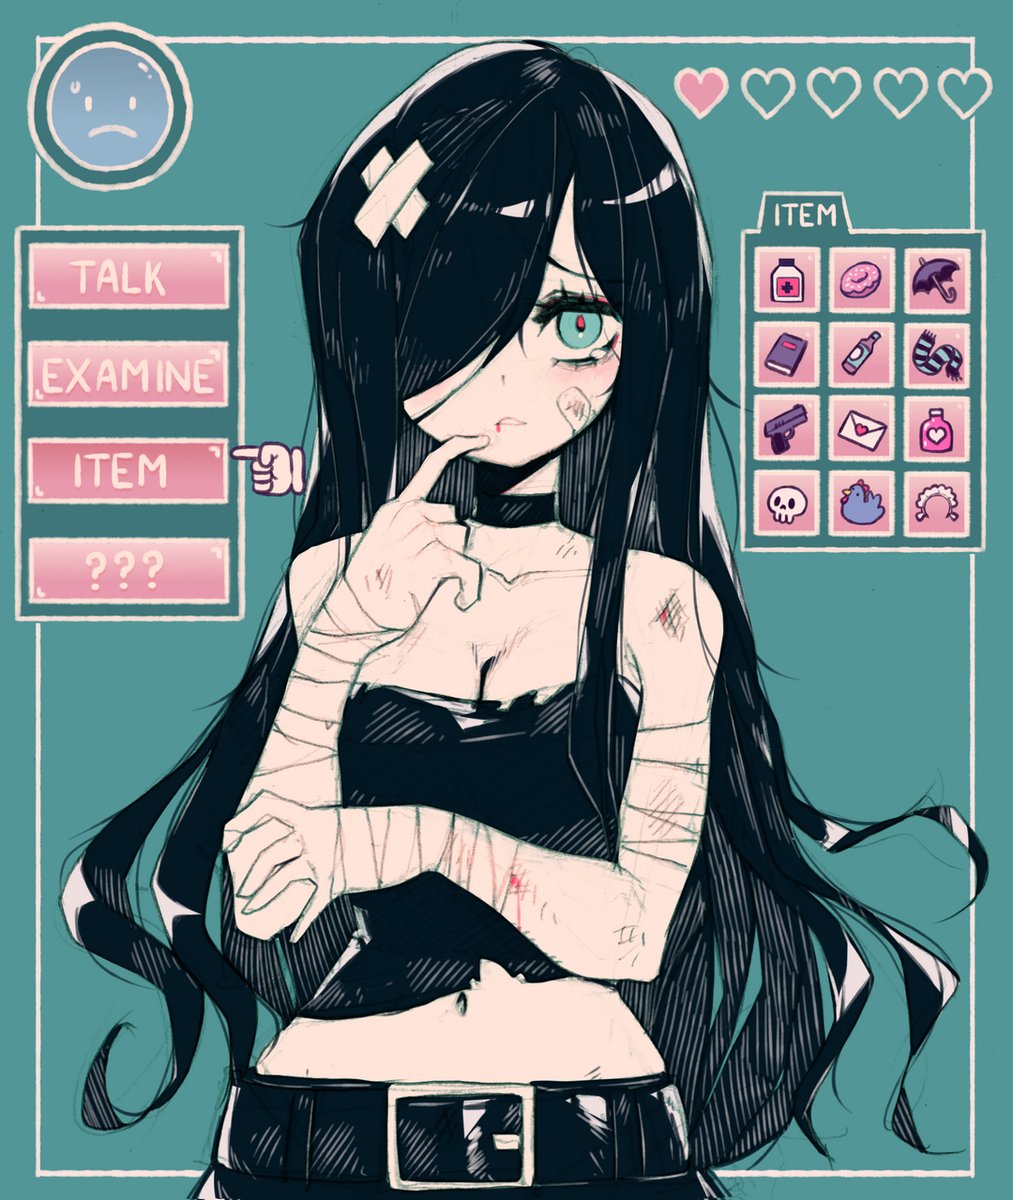 Aria VN moment, choose your actions carefully 💚🖤